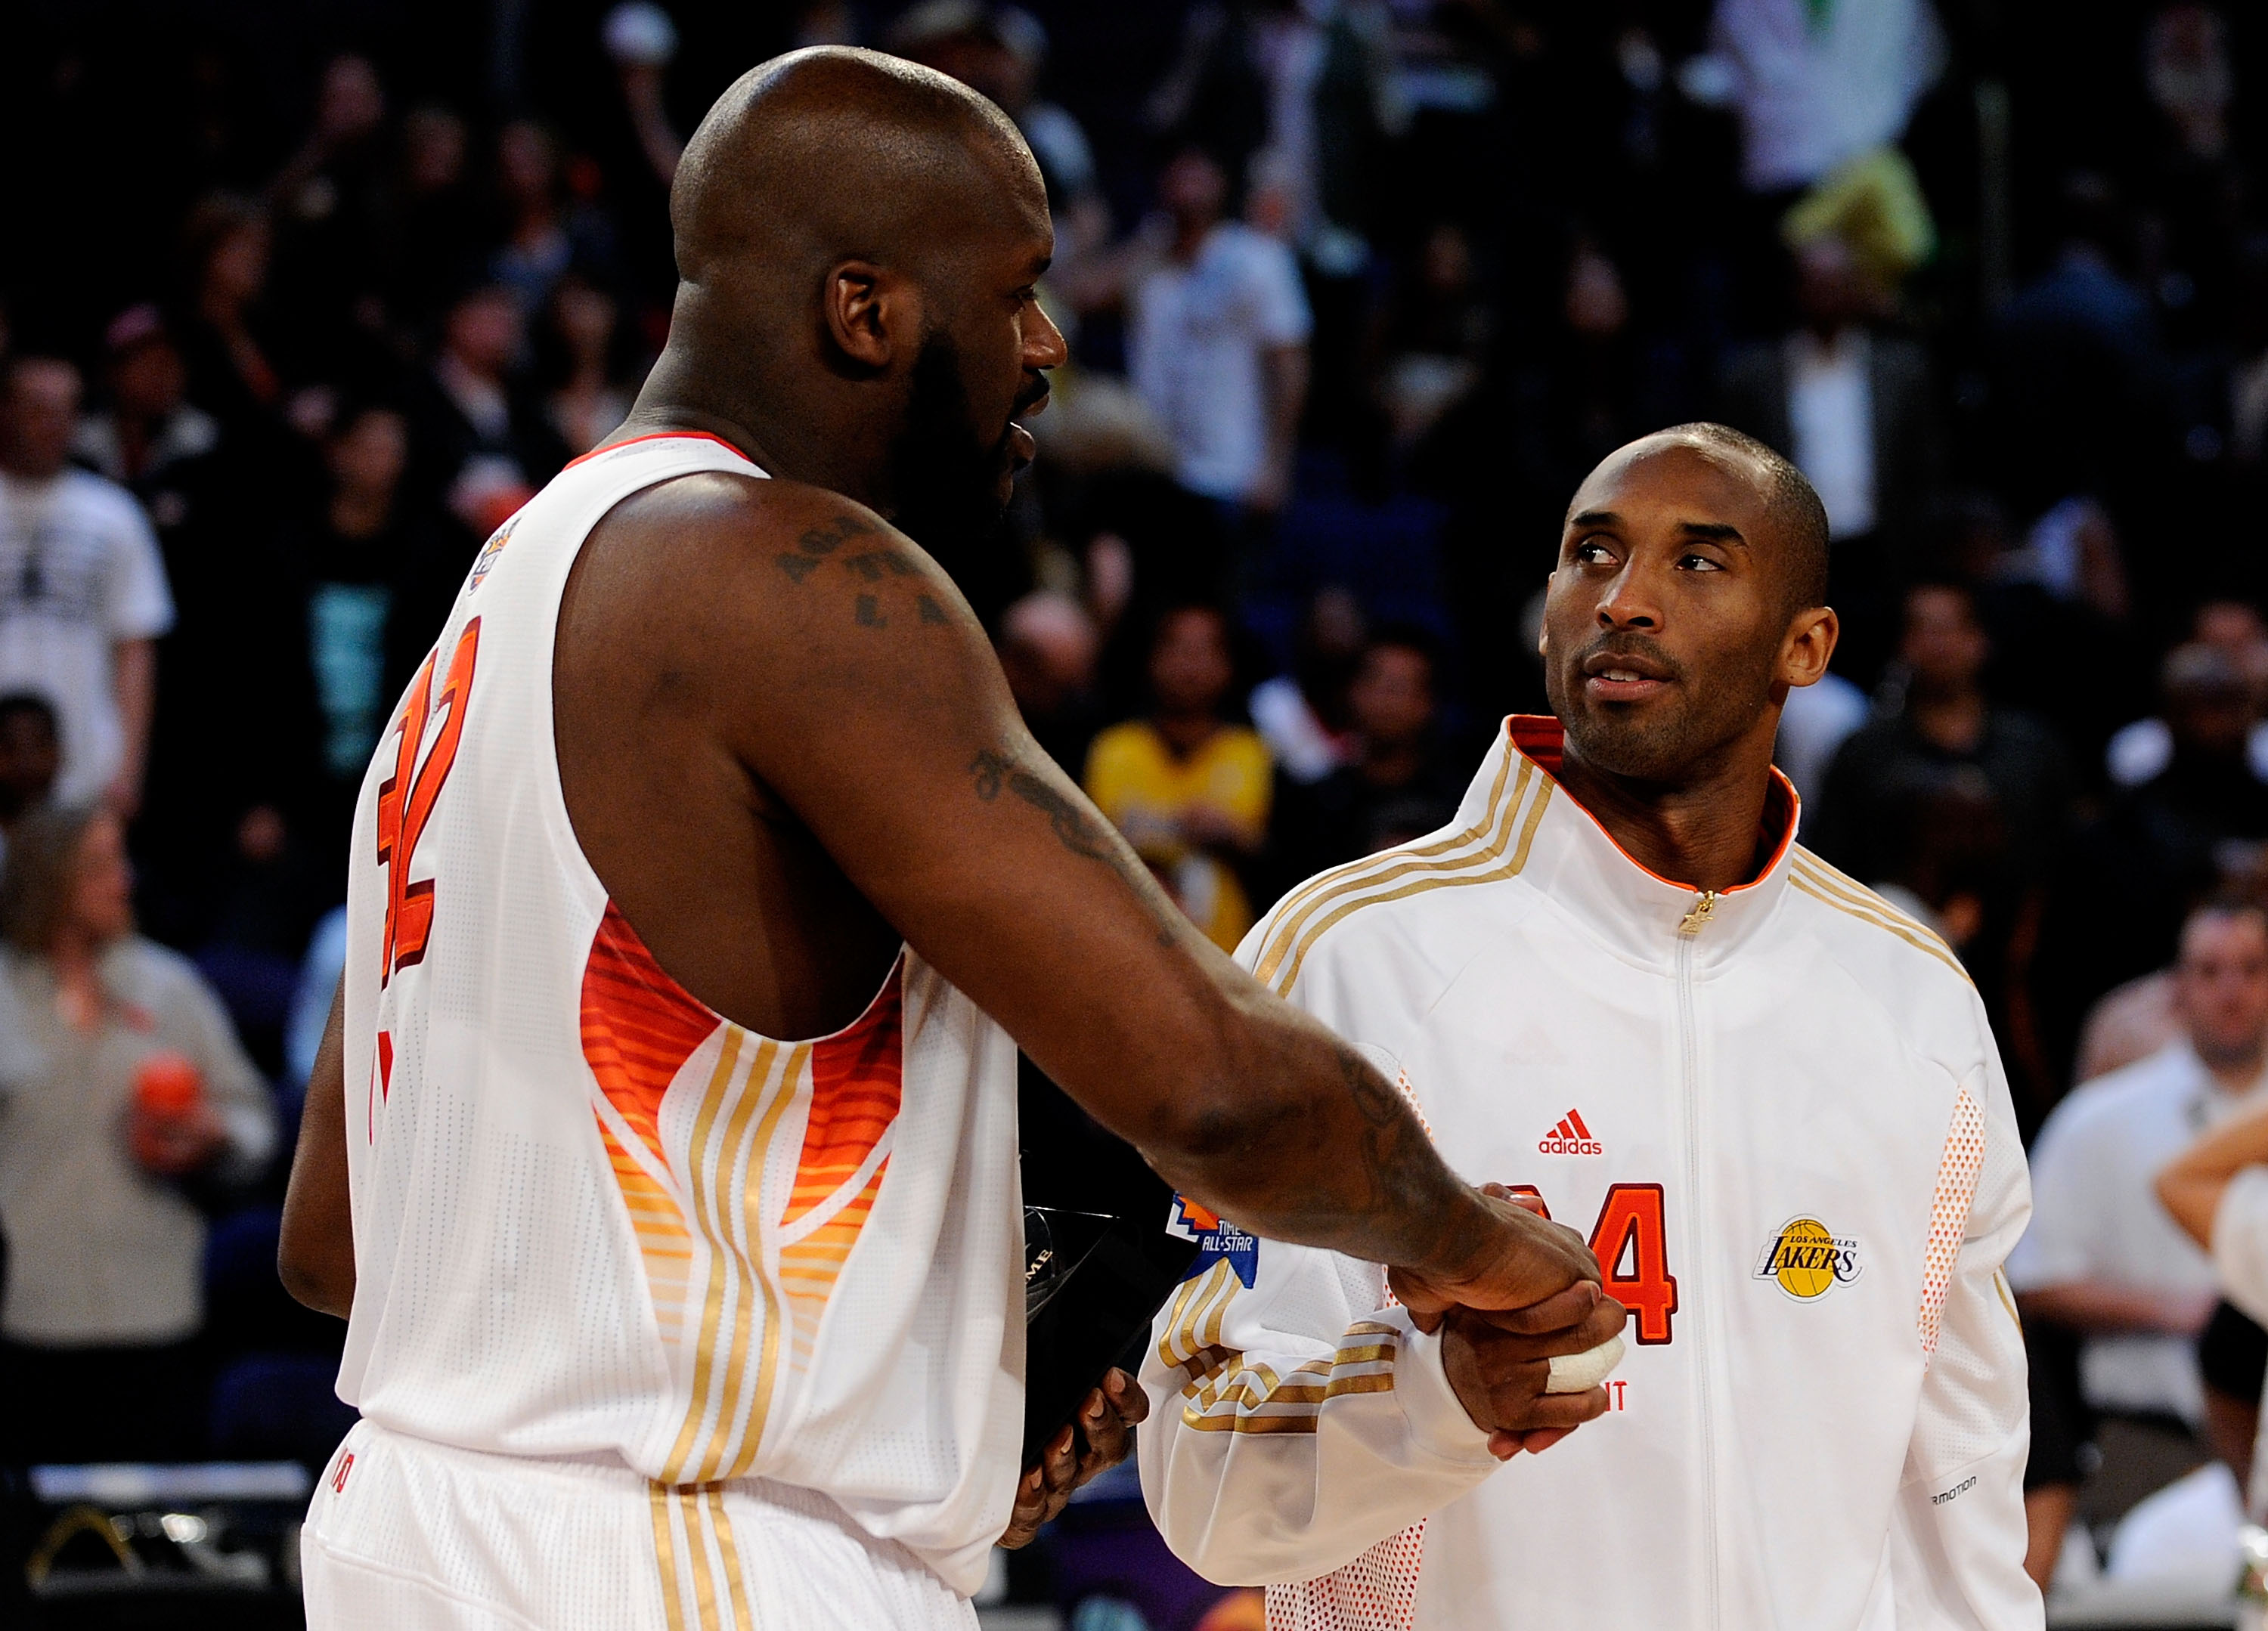 PHOENIX - FEBRUARY 15:  Co-MVPs Shaquille O'Neal #32 and Kobe Bryant #24 of the Western Conference shake hands after the Western Conference defeated the Eastern Conference in the 58th NBA All-Star Game, part of 2009 NBA All-Star Weekend at US Airways Cent